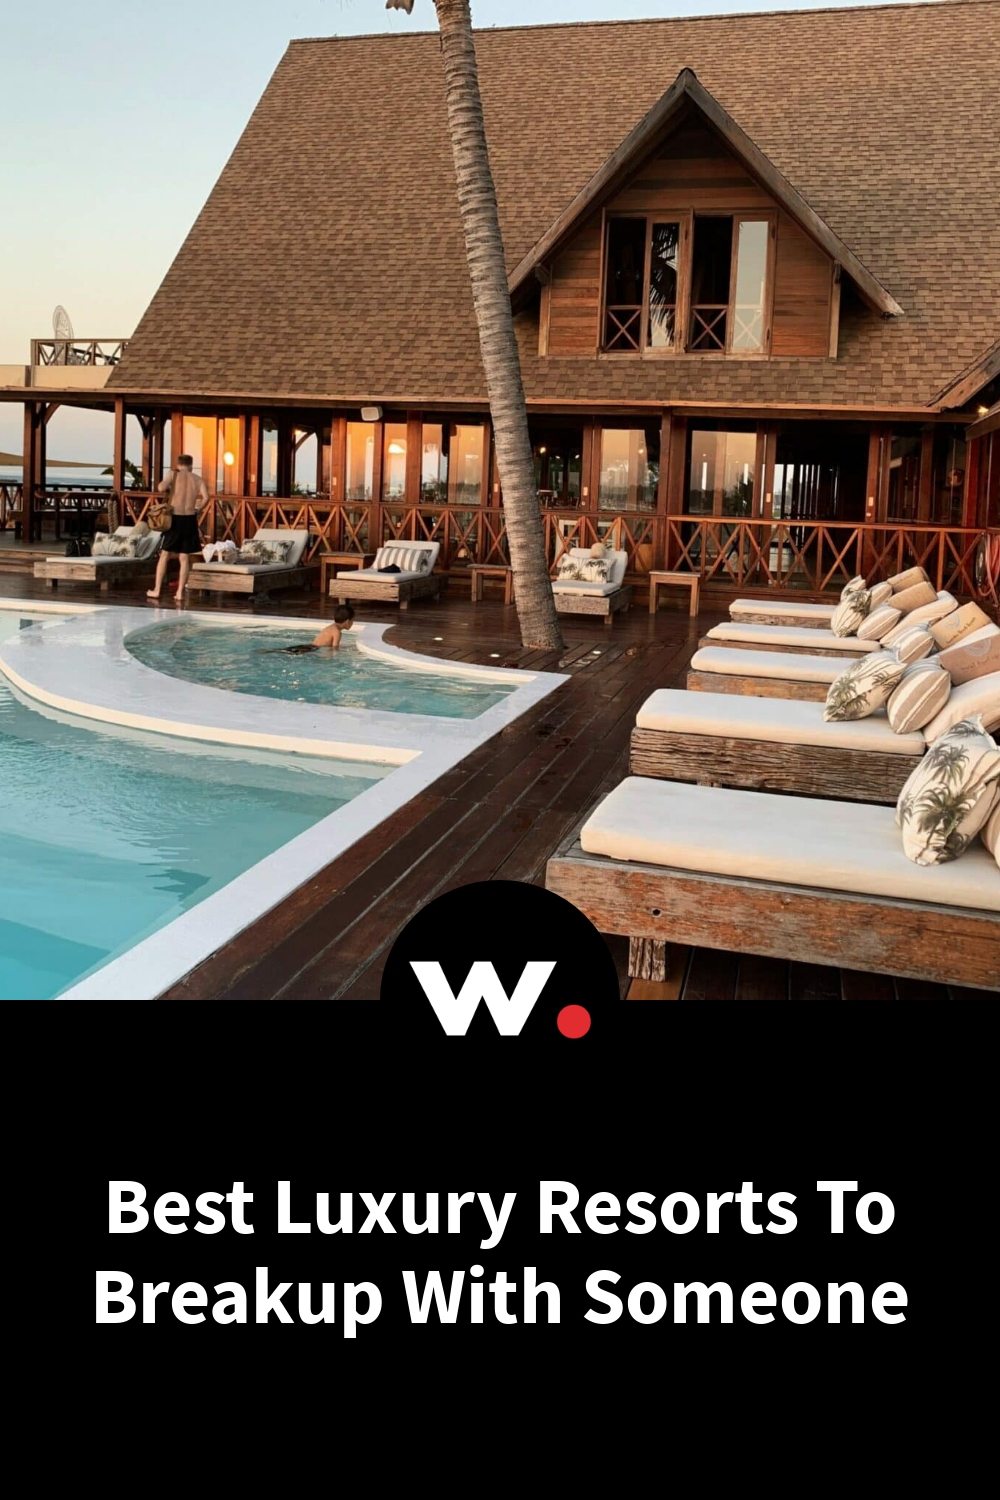 Best Luxury Resorts To Breakup With Someone